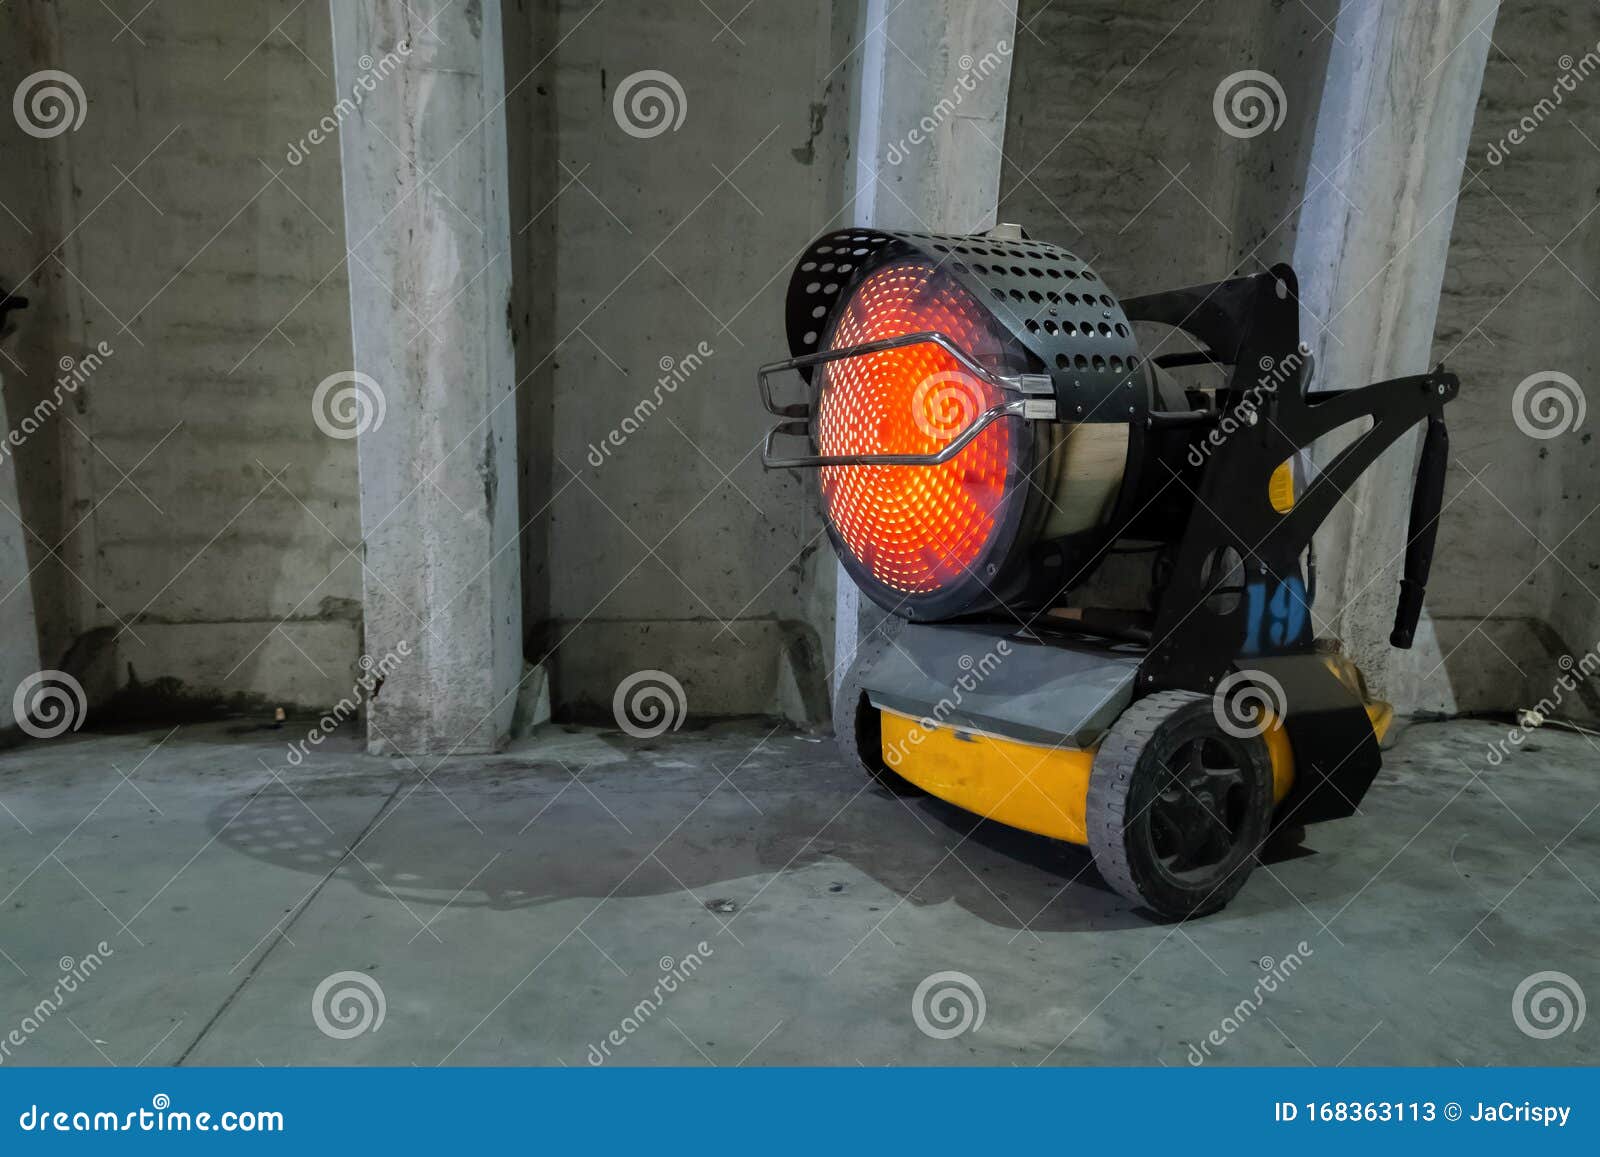 Heavy Duty Industrial Heater Blowing Hot Air In Cold Building Interior Heat Compressor Or Heat Fan Propeller Propelling Warm Air Stock Image Image Of Commercial Blower